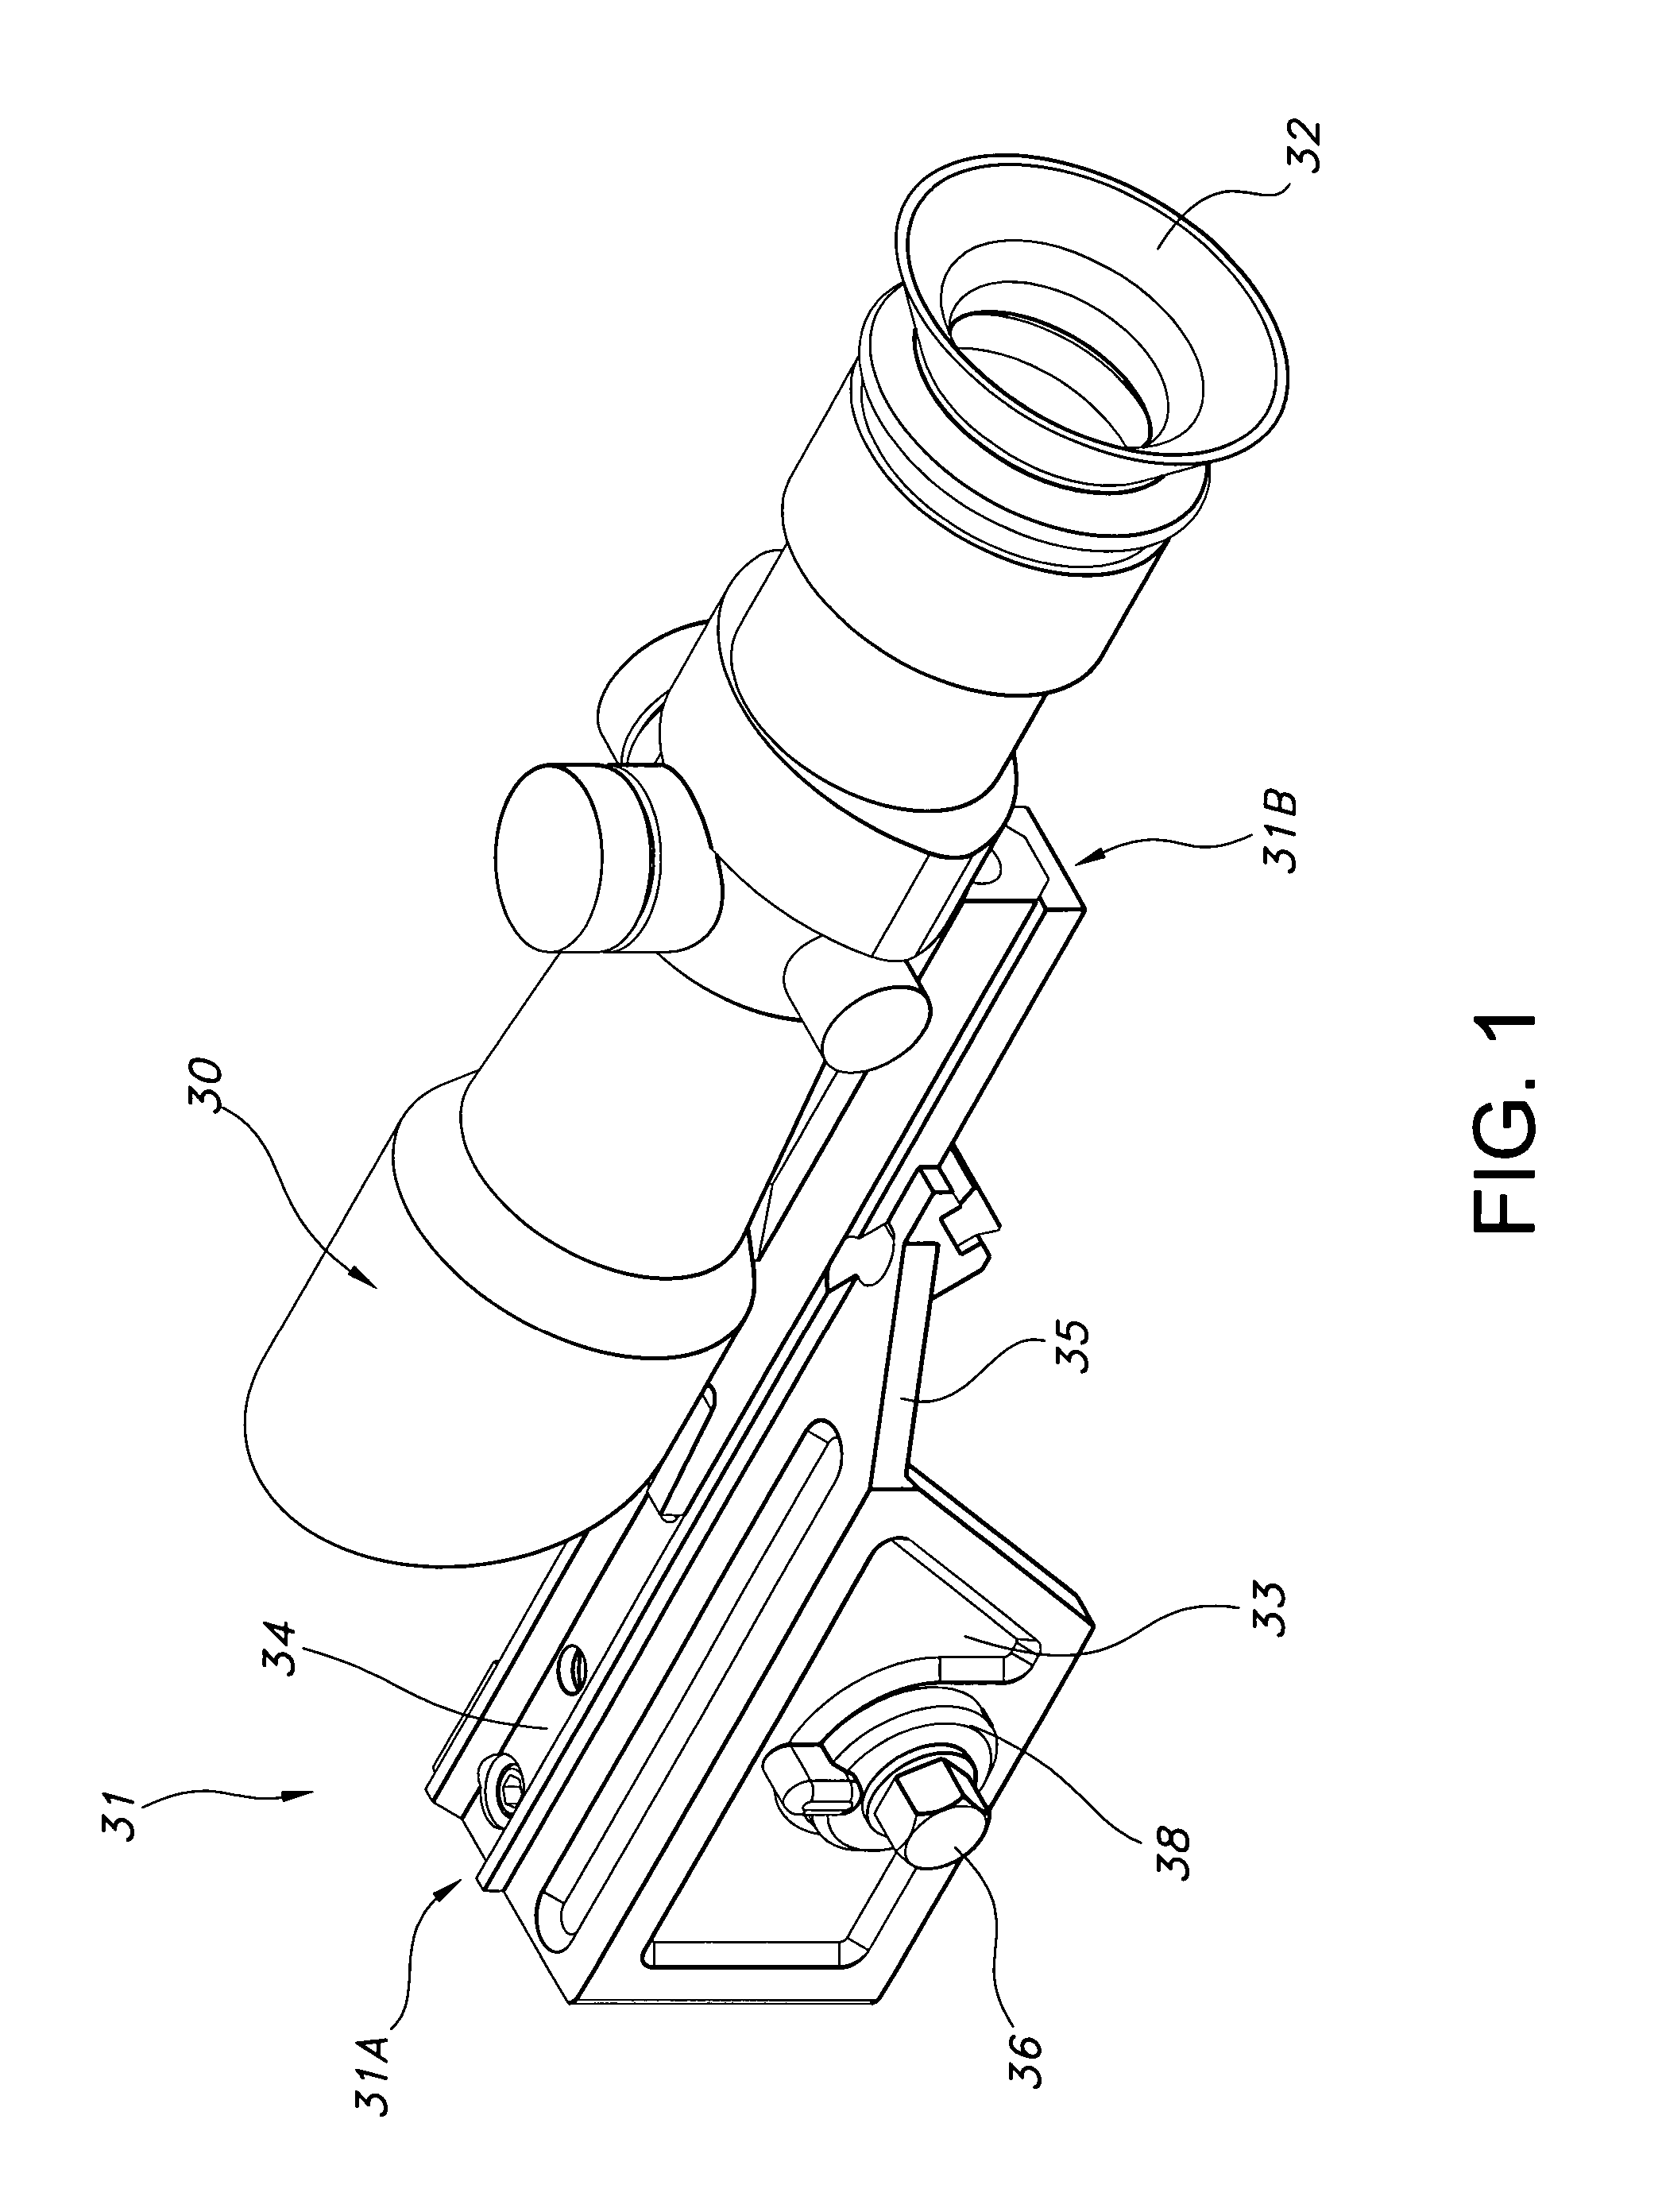 Removable optical sight mount adapted for use with M14, M1A and similar rifles and method for removably attaching an optical sight to a rifle